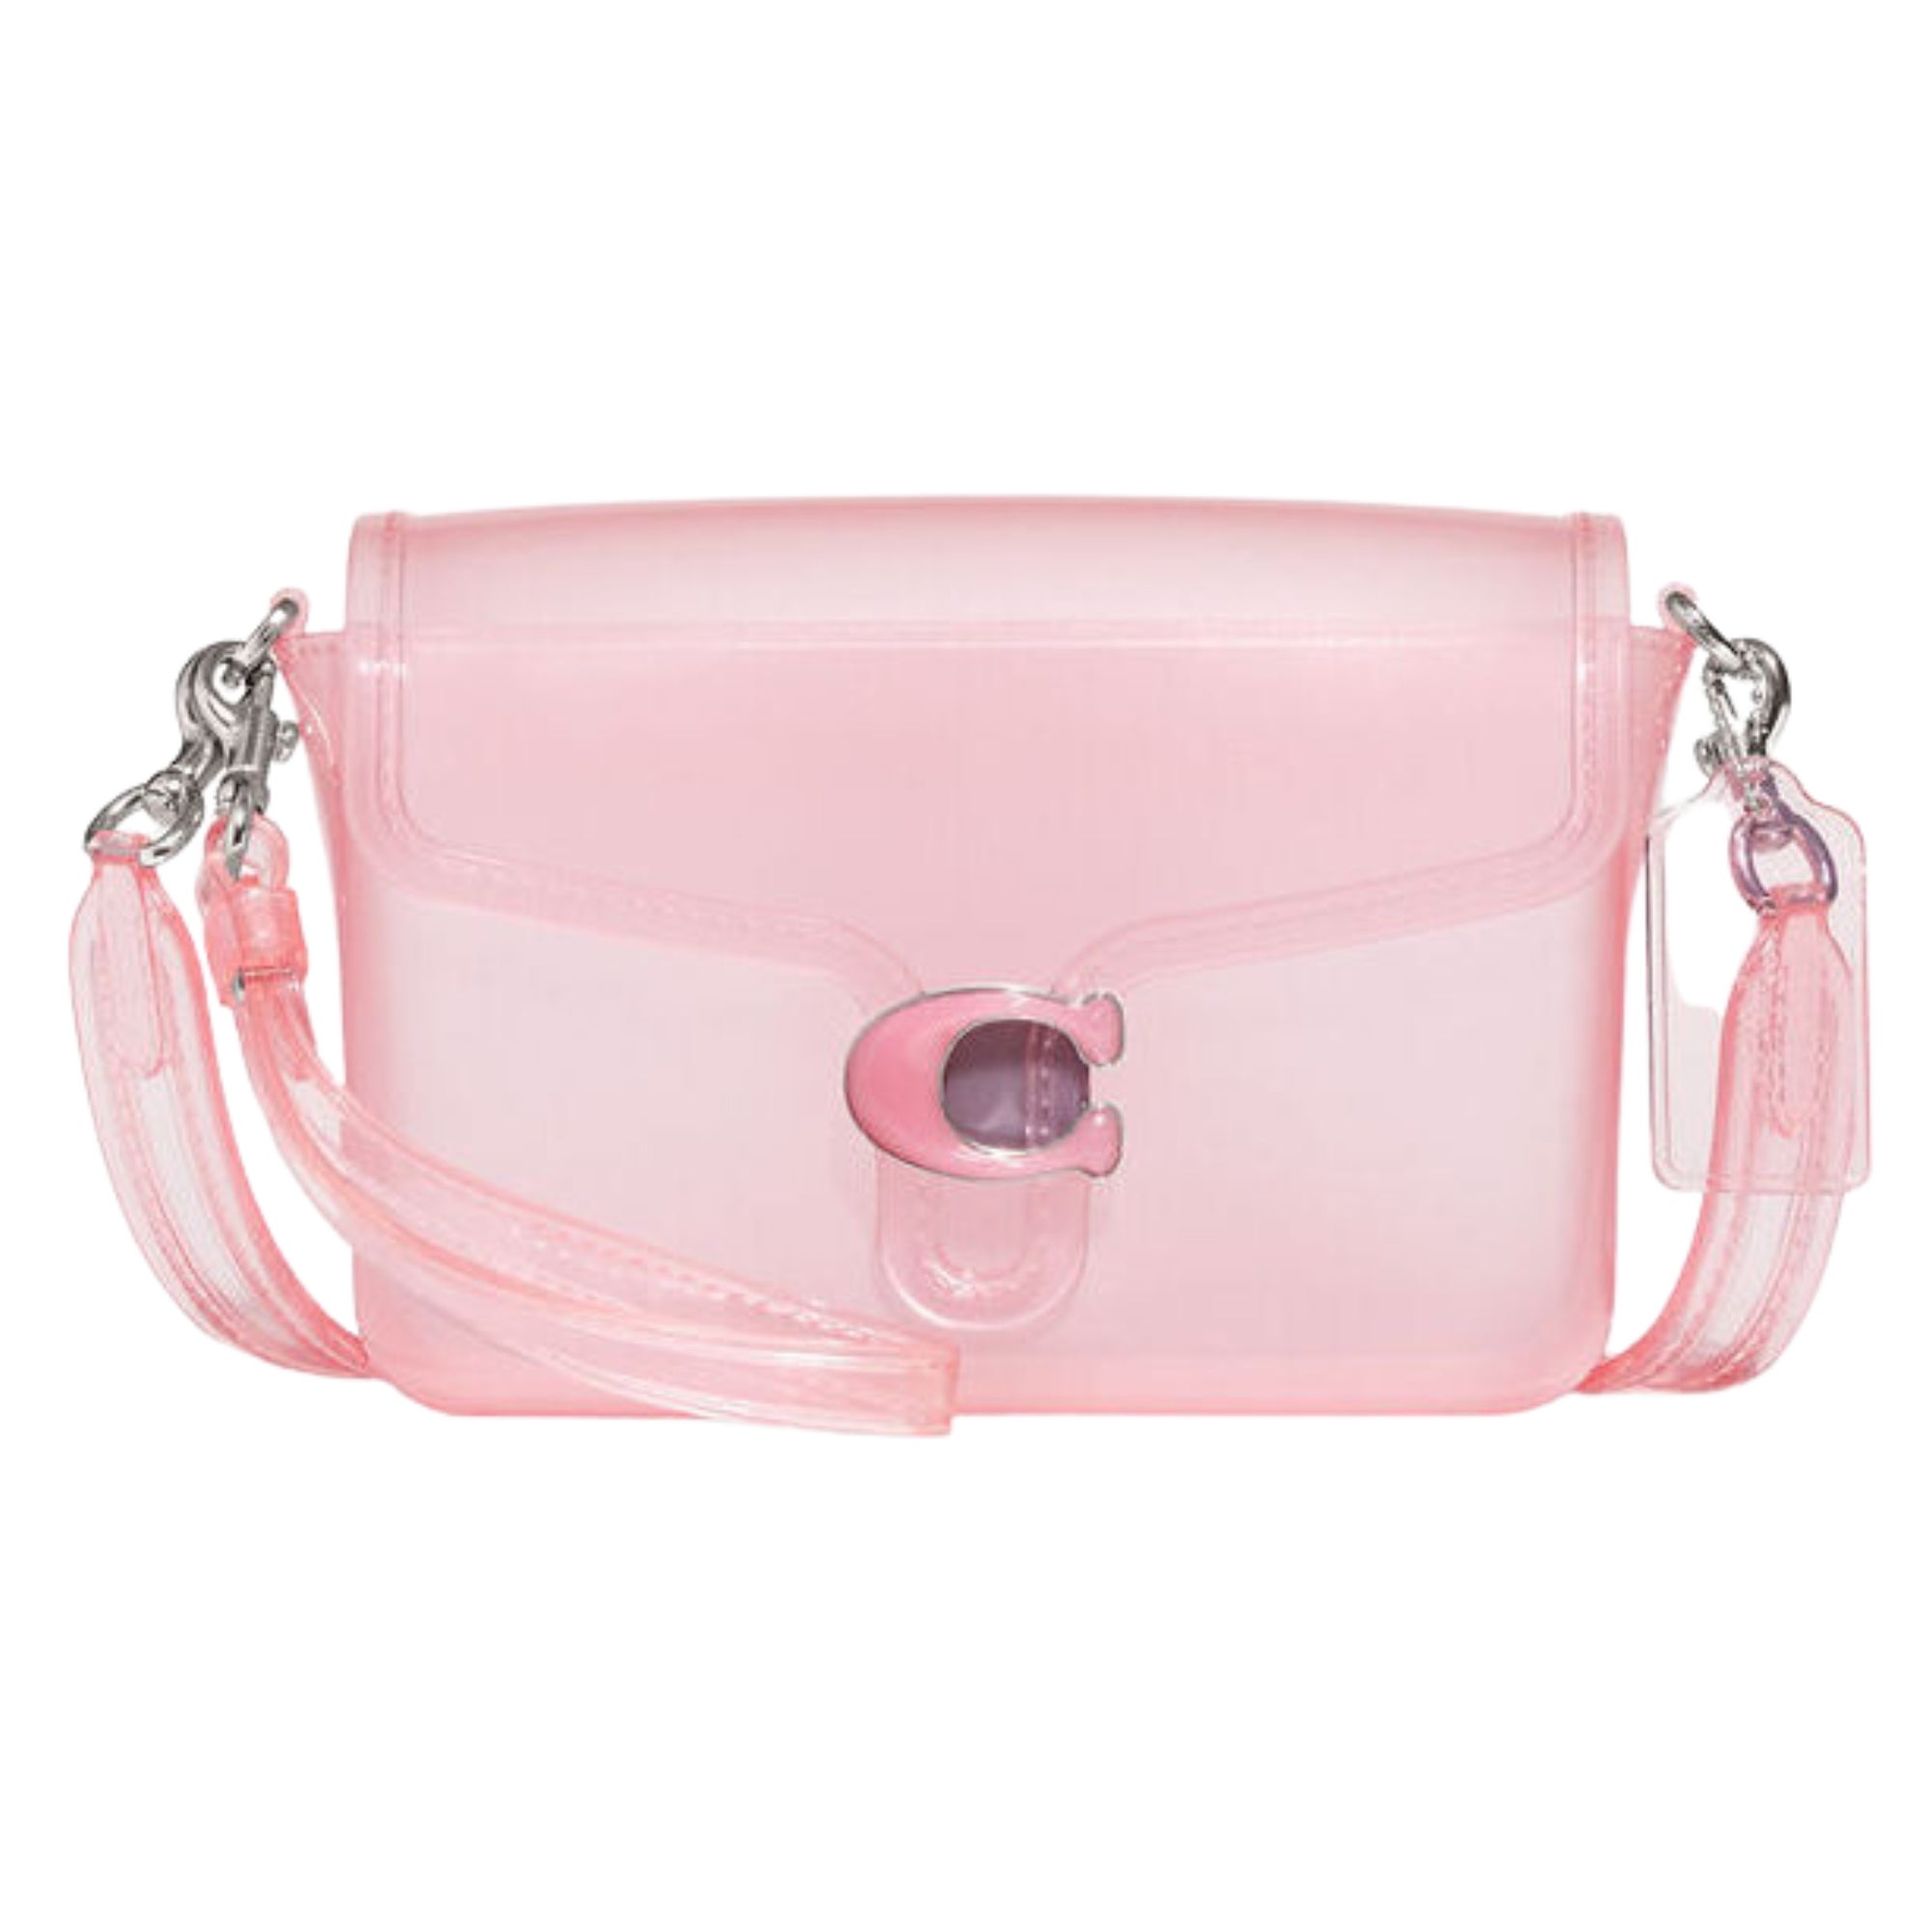 Coach Pink Jelly Tabby Shoulder Bag For Sale